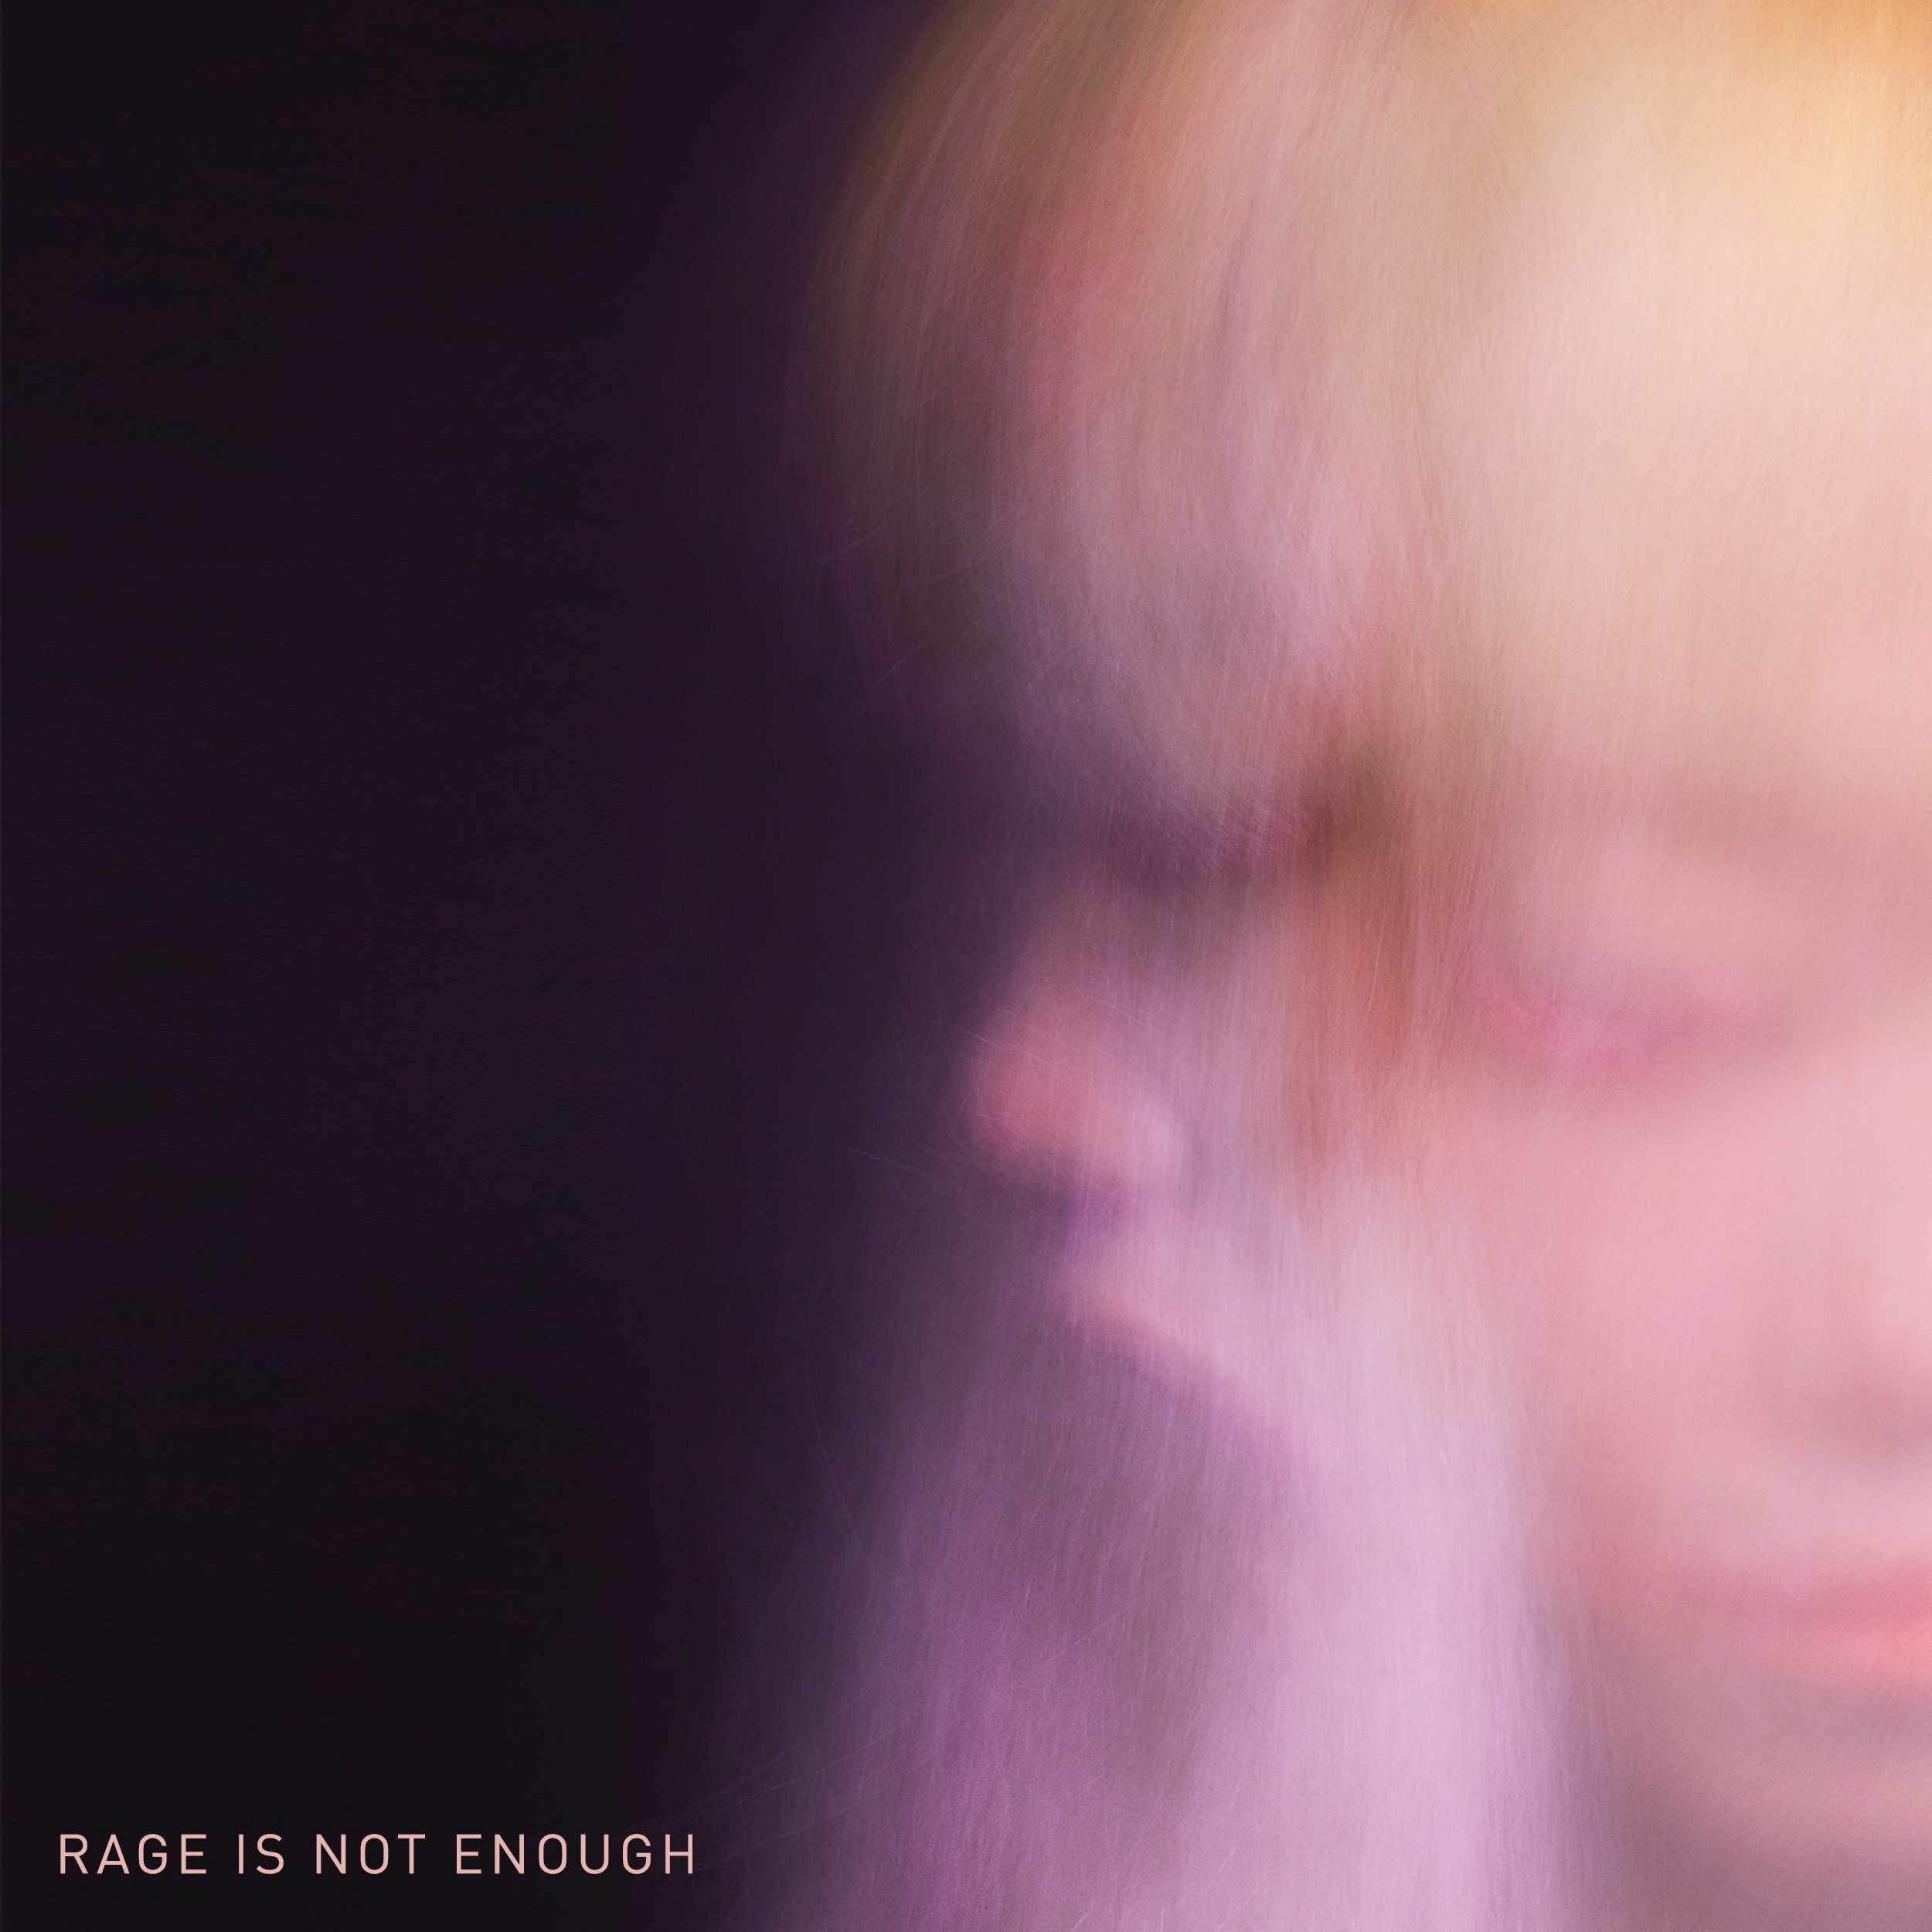 NEW SINGLE // RAGE IS NOT ENOUGH (DANJA MIX) // RELEASED